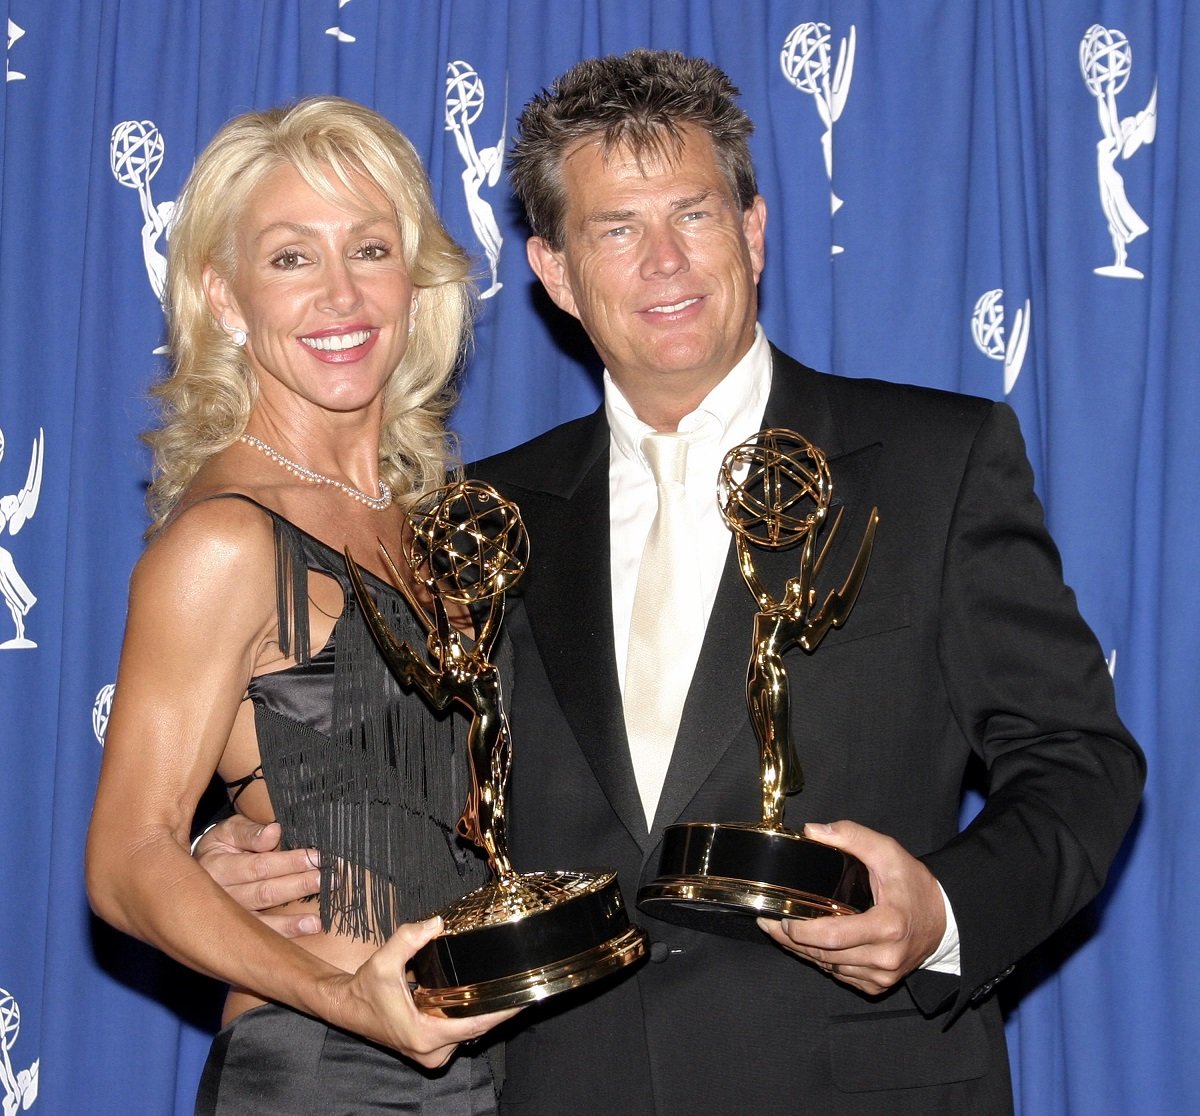 David Foster and Linda Thompson at the 55th Annual Primetime Emmy Awards